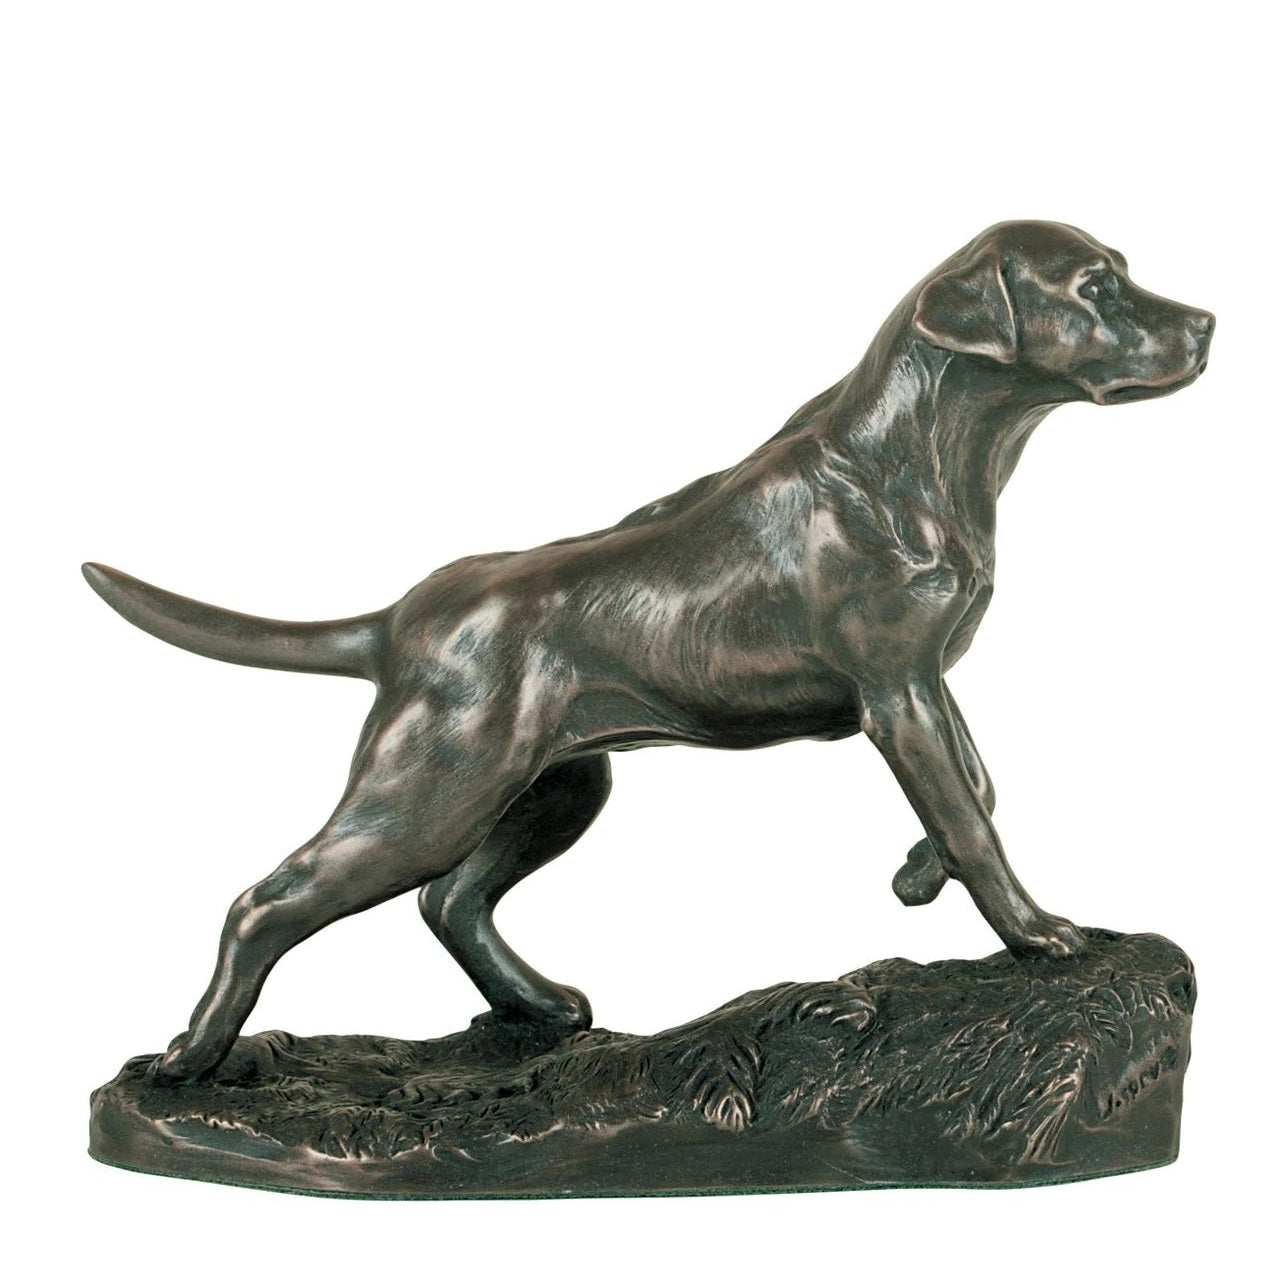 Genesis Labrador  A beautiful piece of bronze sculpture depicting a Labrador.  Genesis Fine Arts has evolved into a much loved and world famous Irish brand to produce a striking range of handcrafted cold cast bronze sculptures.